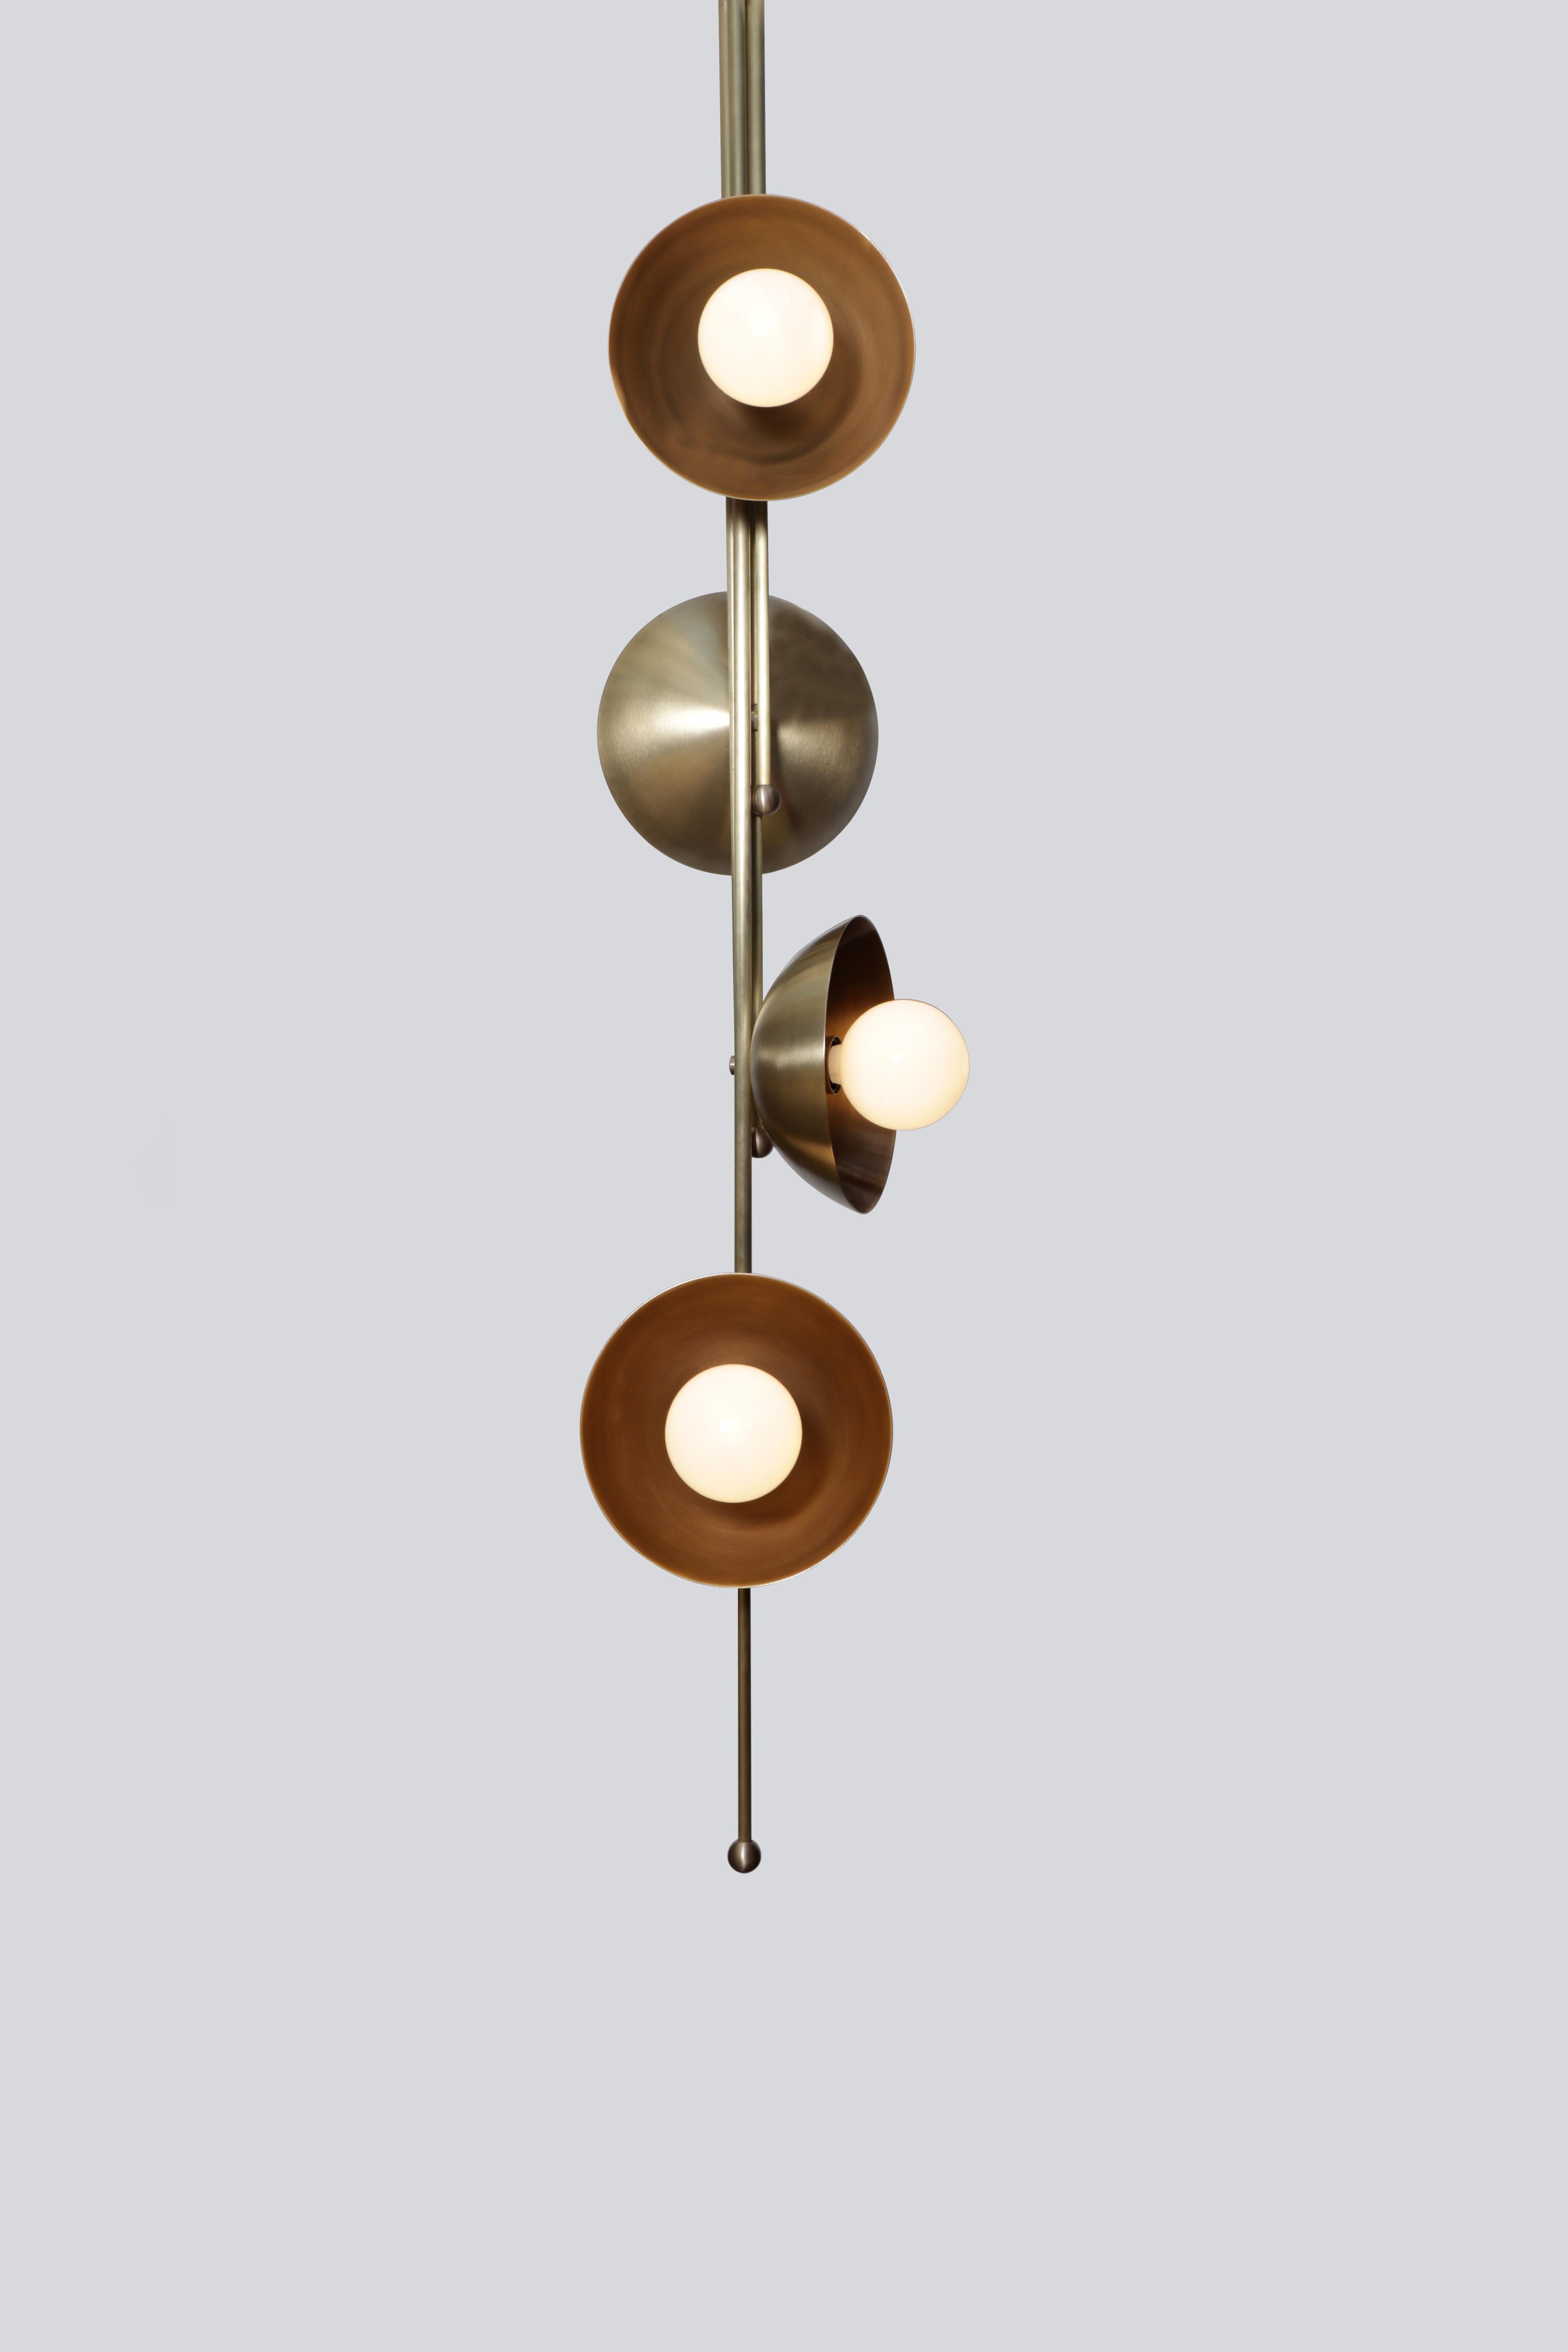 Drop 4 Brass Dome Pendant Lamp by Lamp Shaper
Dimensions: D 43 x W 43 x H 165 cm.
Materials: Brass.

Different finishes available: raw brass, aged brass, burnt brass and brushed brass Please contact us.

All our lamps can be wired according to each